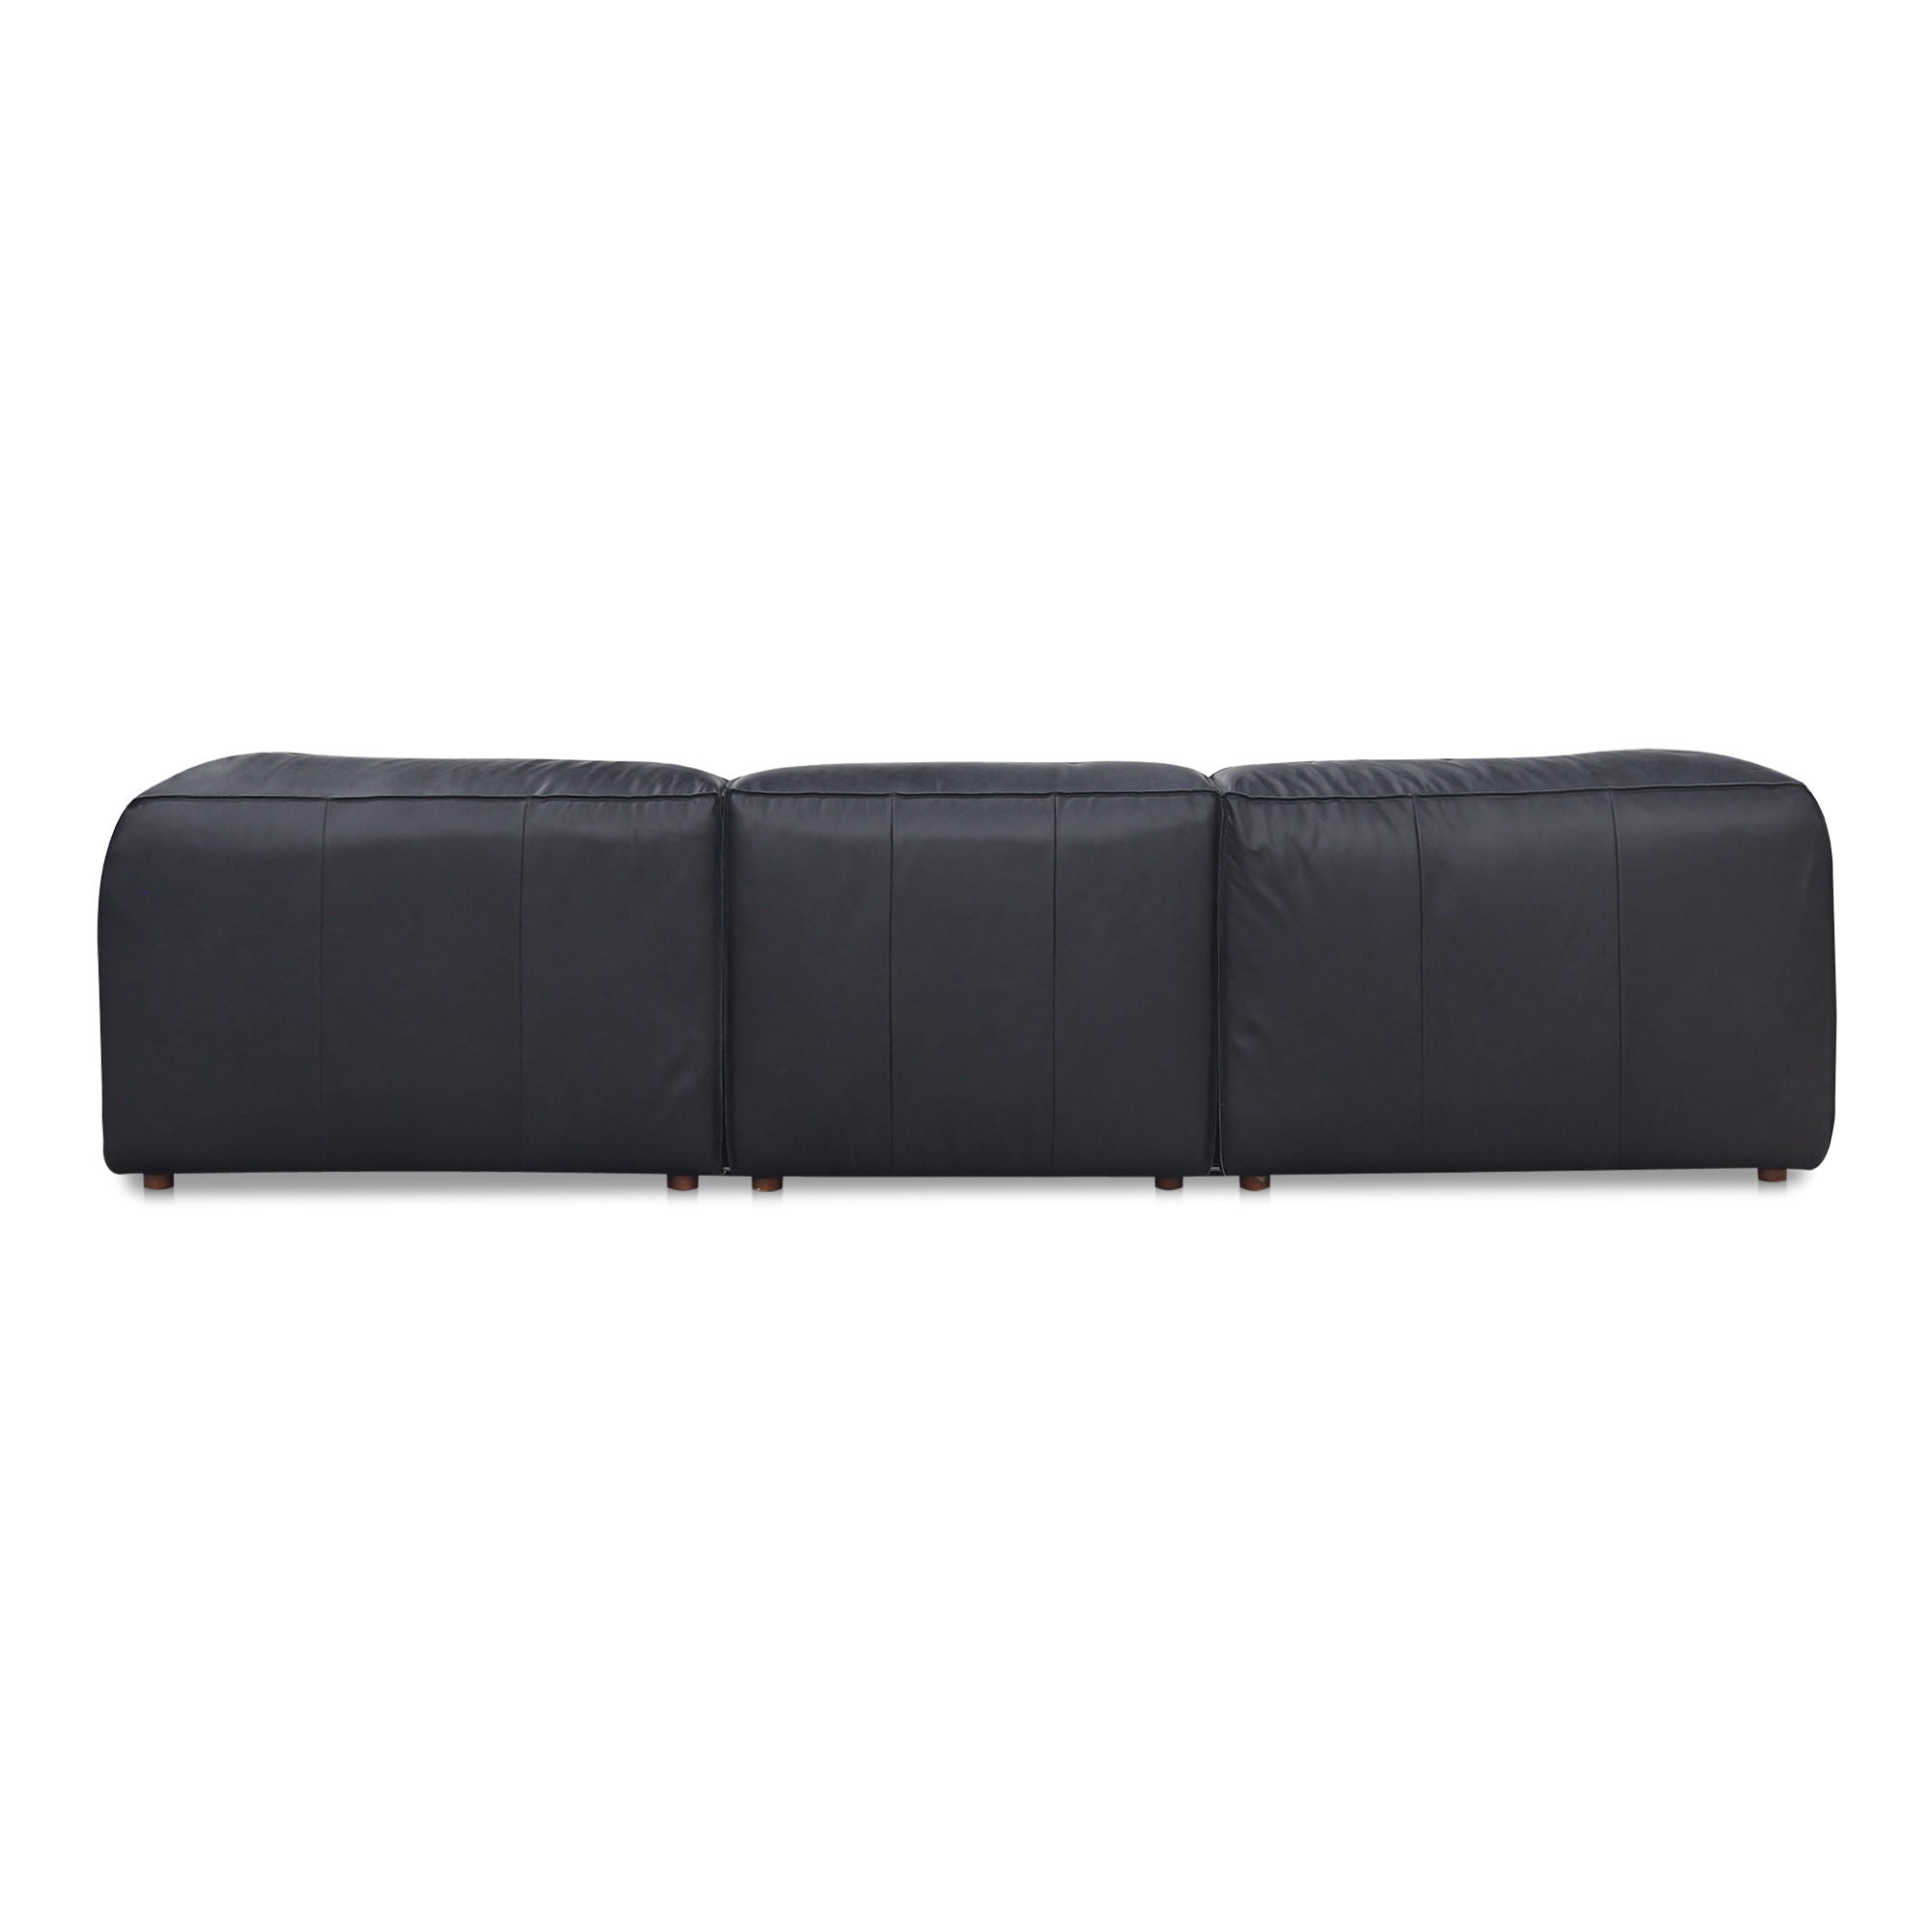 Form - Signature Modular Sectional - Black-Stationary Sectionals-American Furniture Outlet